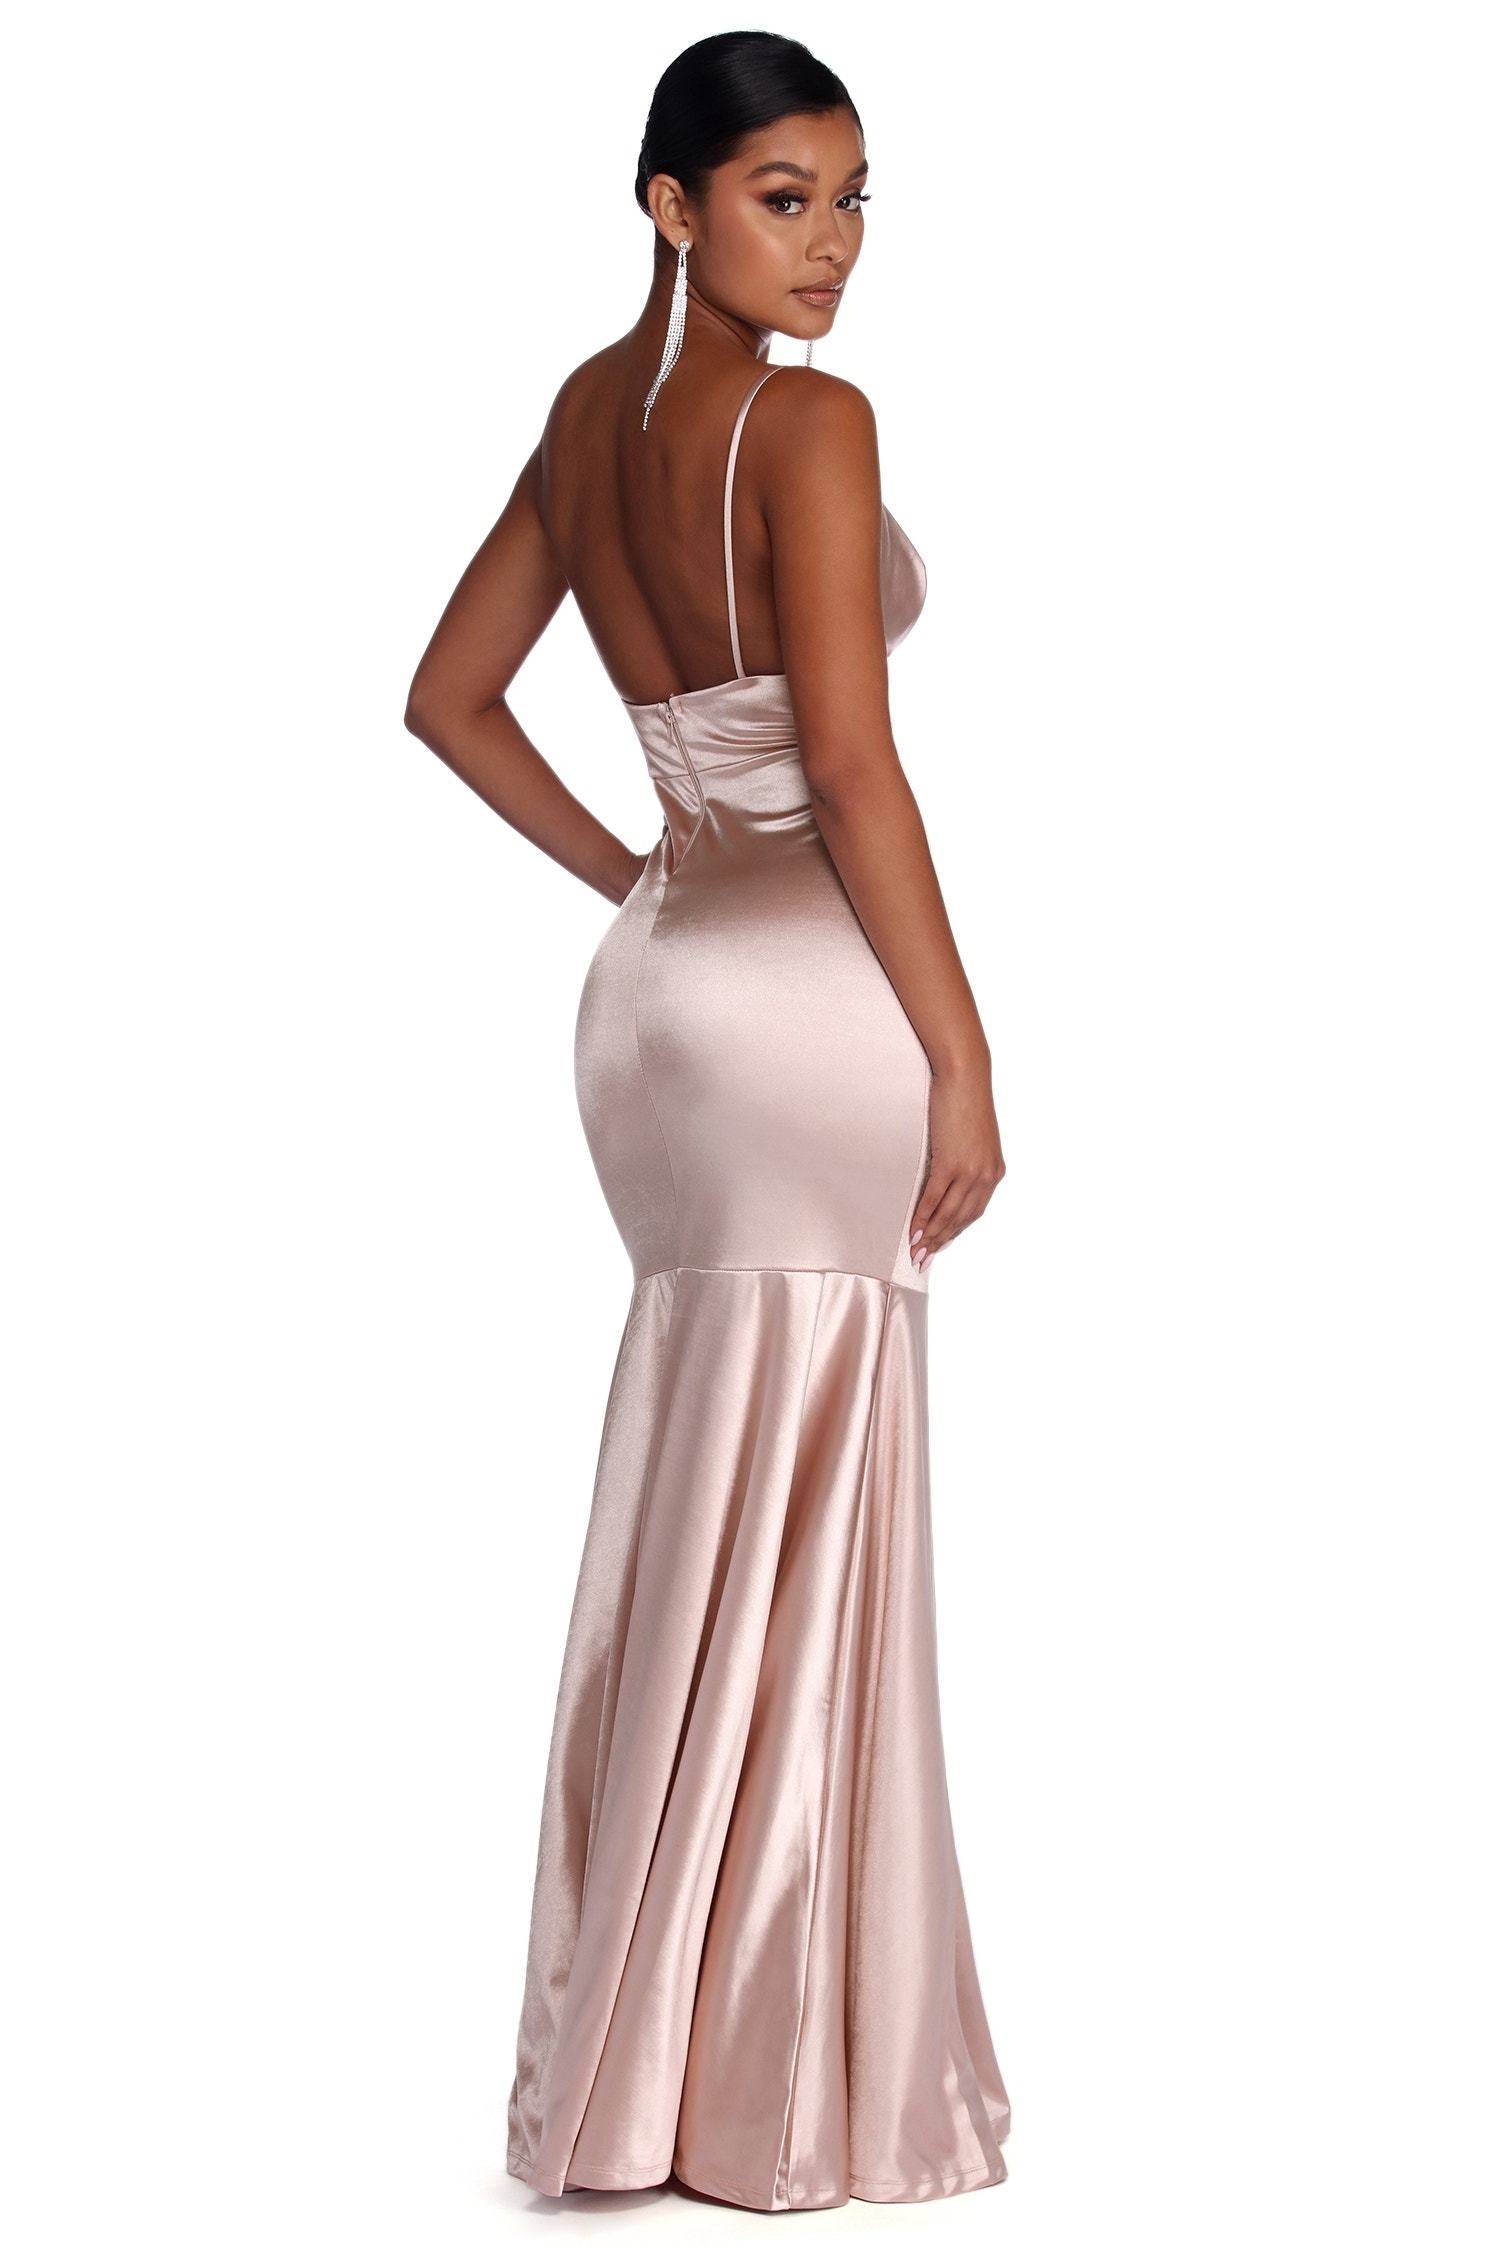 Isabel Formal Satin Mermaid Dress - Lady Occasions